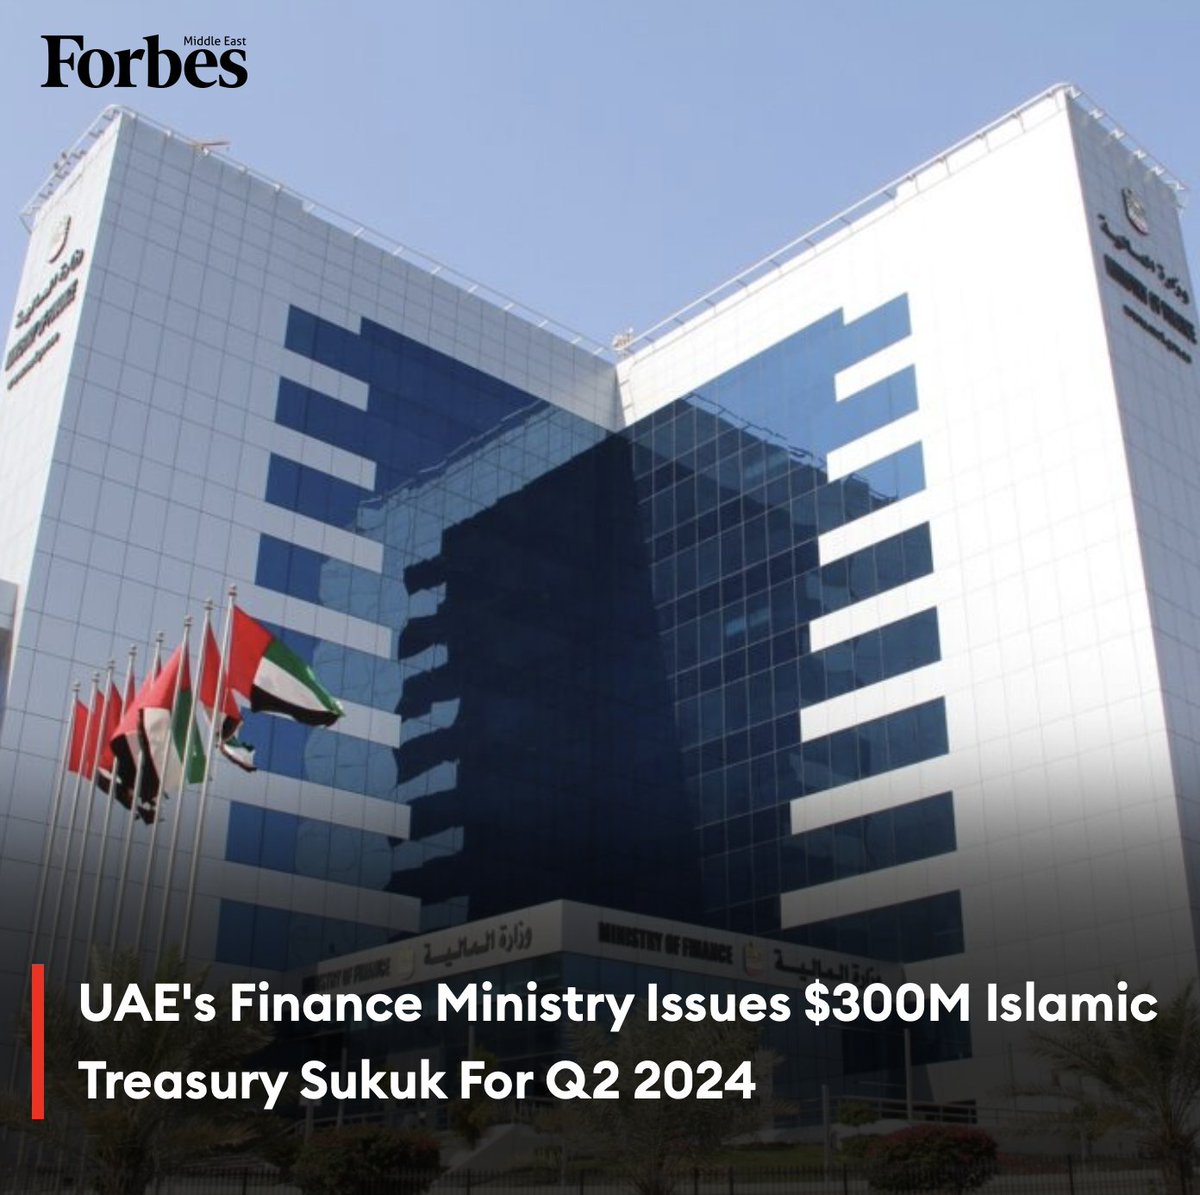 The #UAE’s Finance Ministry has issued $300 million in Islamic Treasury Sukuk for the second quarter of 2024. #Forbes For more details: 🔗 on.forbesmiddleeast.com/l7kn